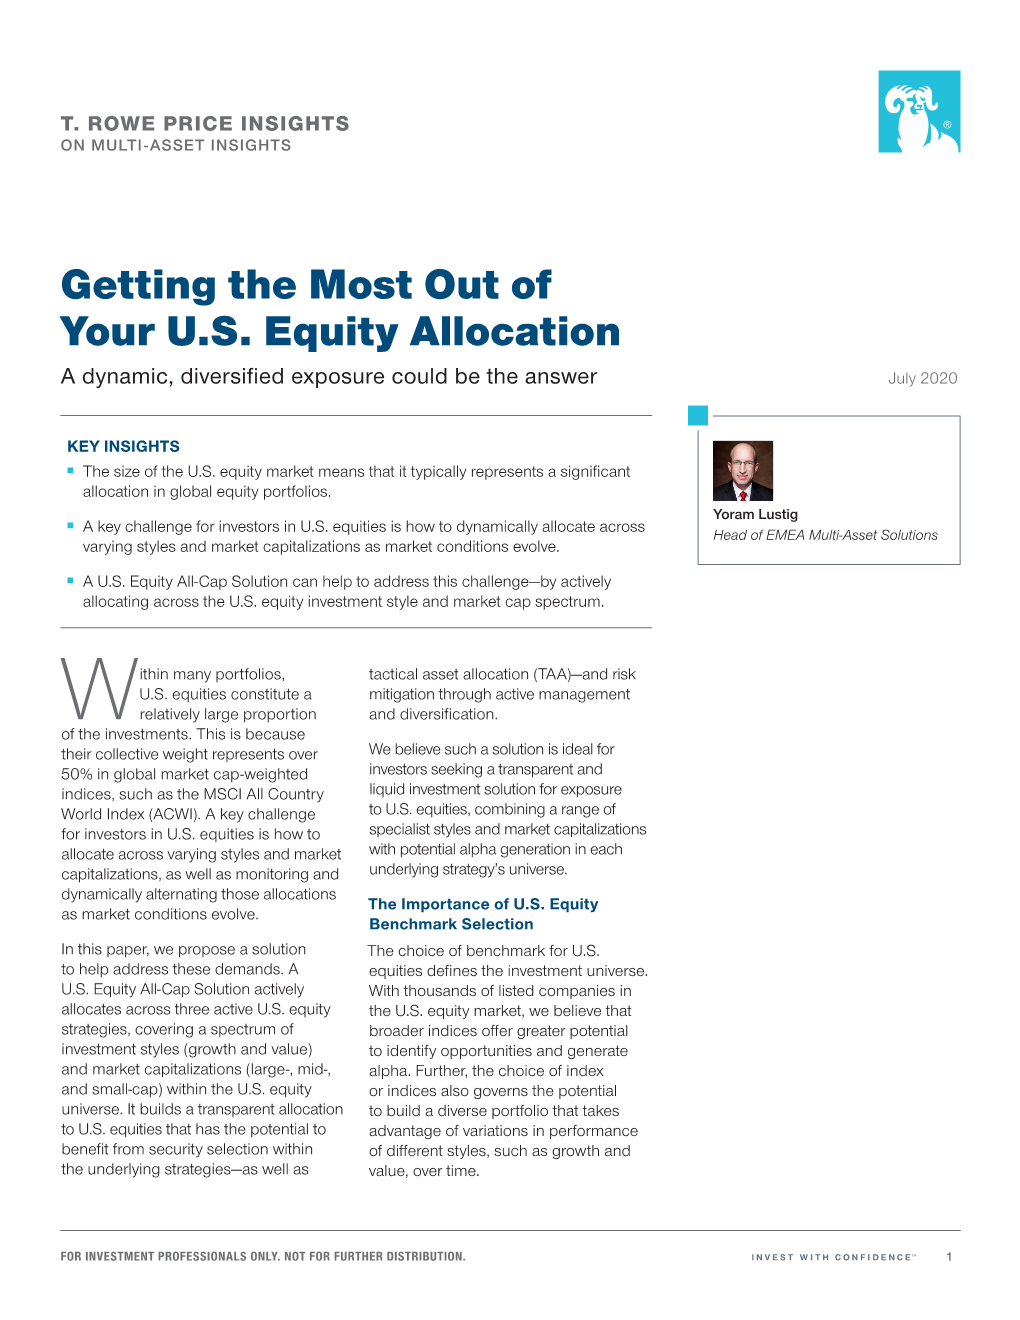 Getting the Most out of Your U.S. Equity Allocation a Dynamic, Diversified Exposure Could Be the Answer July 2020